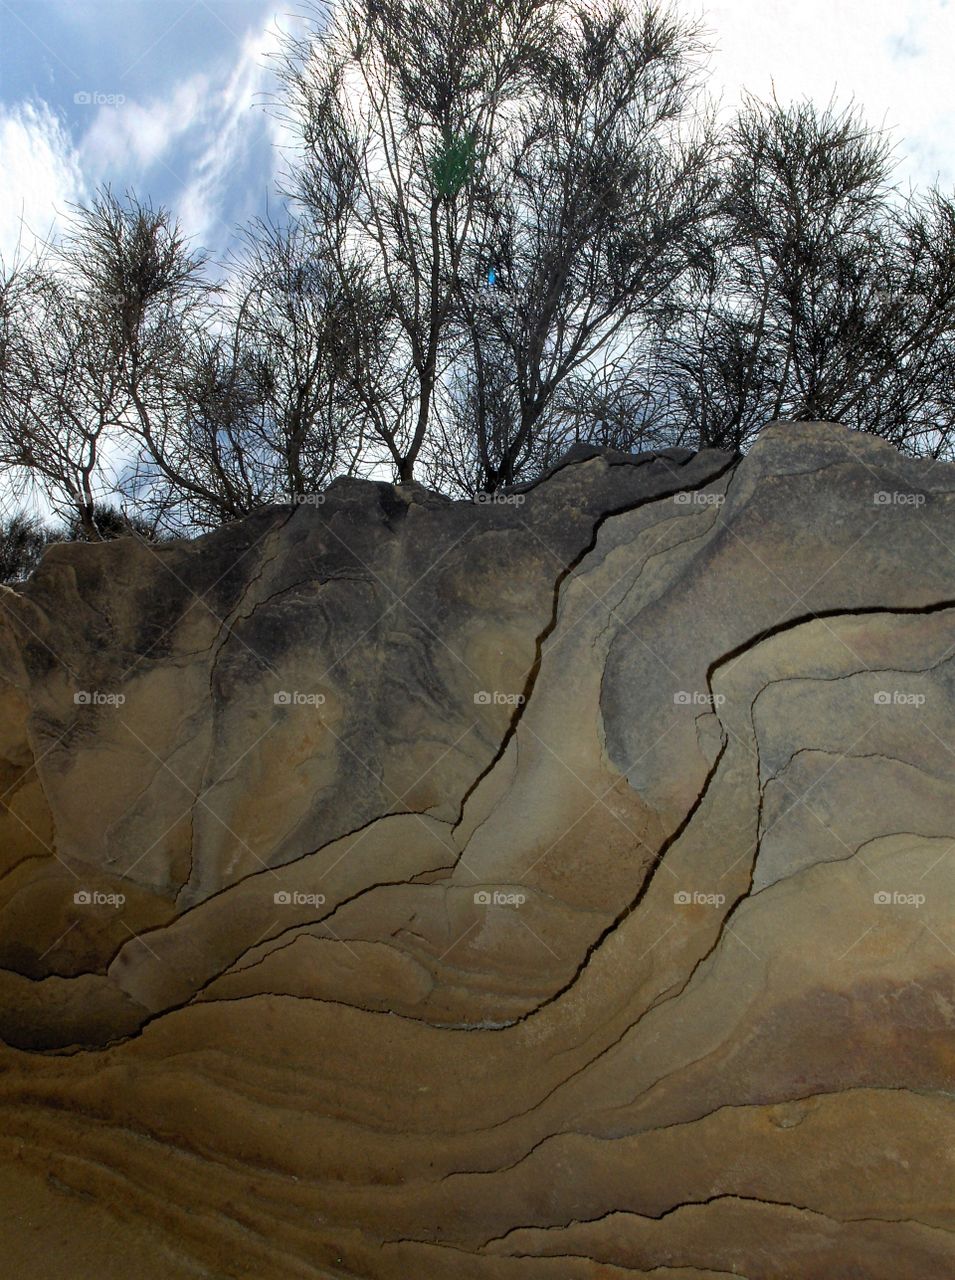 formations in sandstone